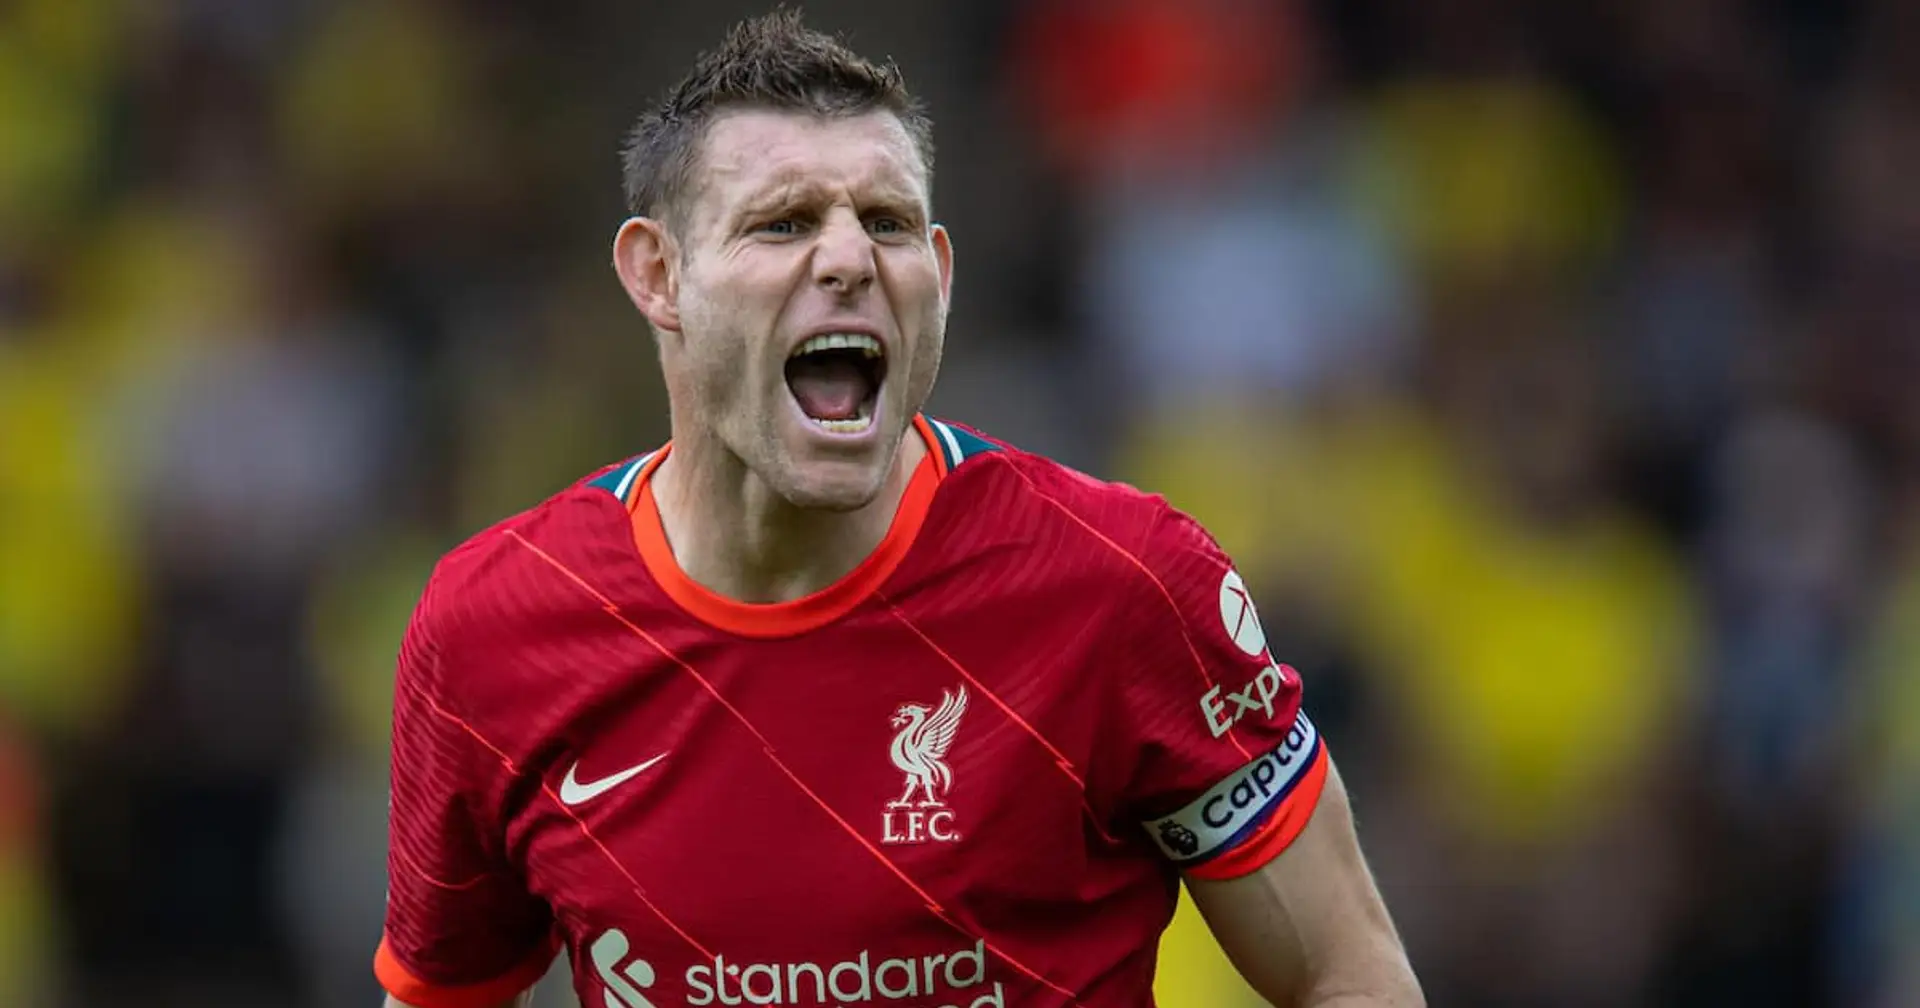 4 tackles won, 85% passing accuracy & more: Milner's excellent stats from Palace victory